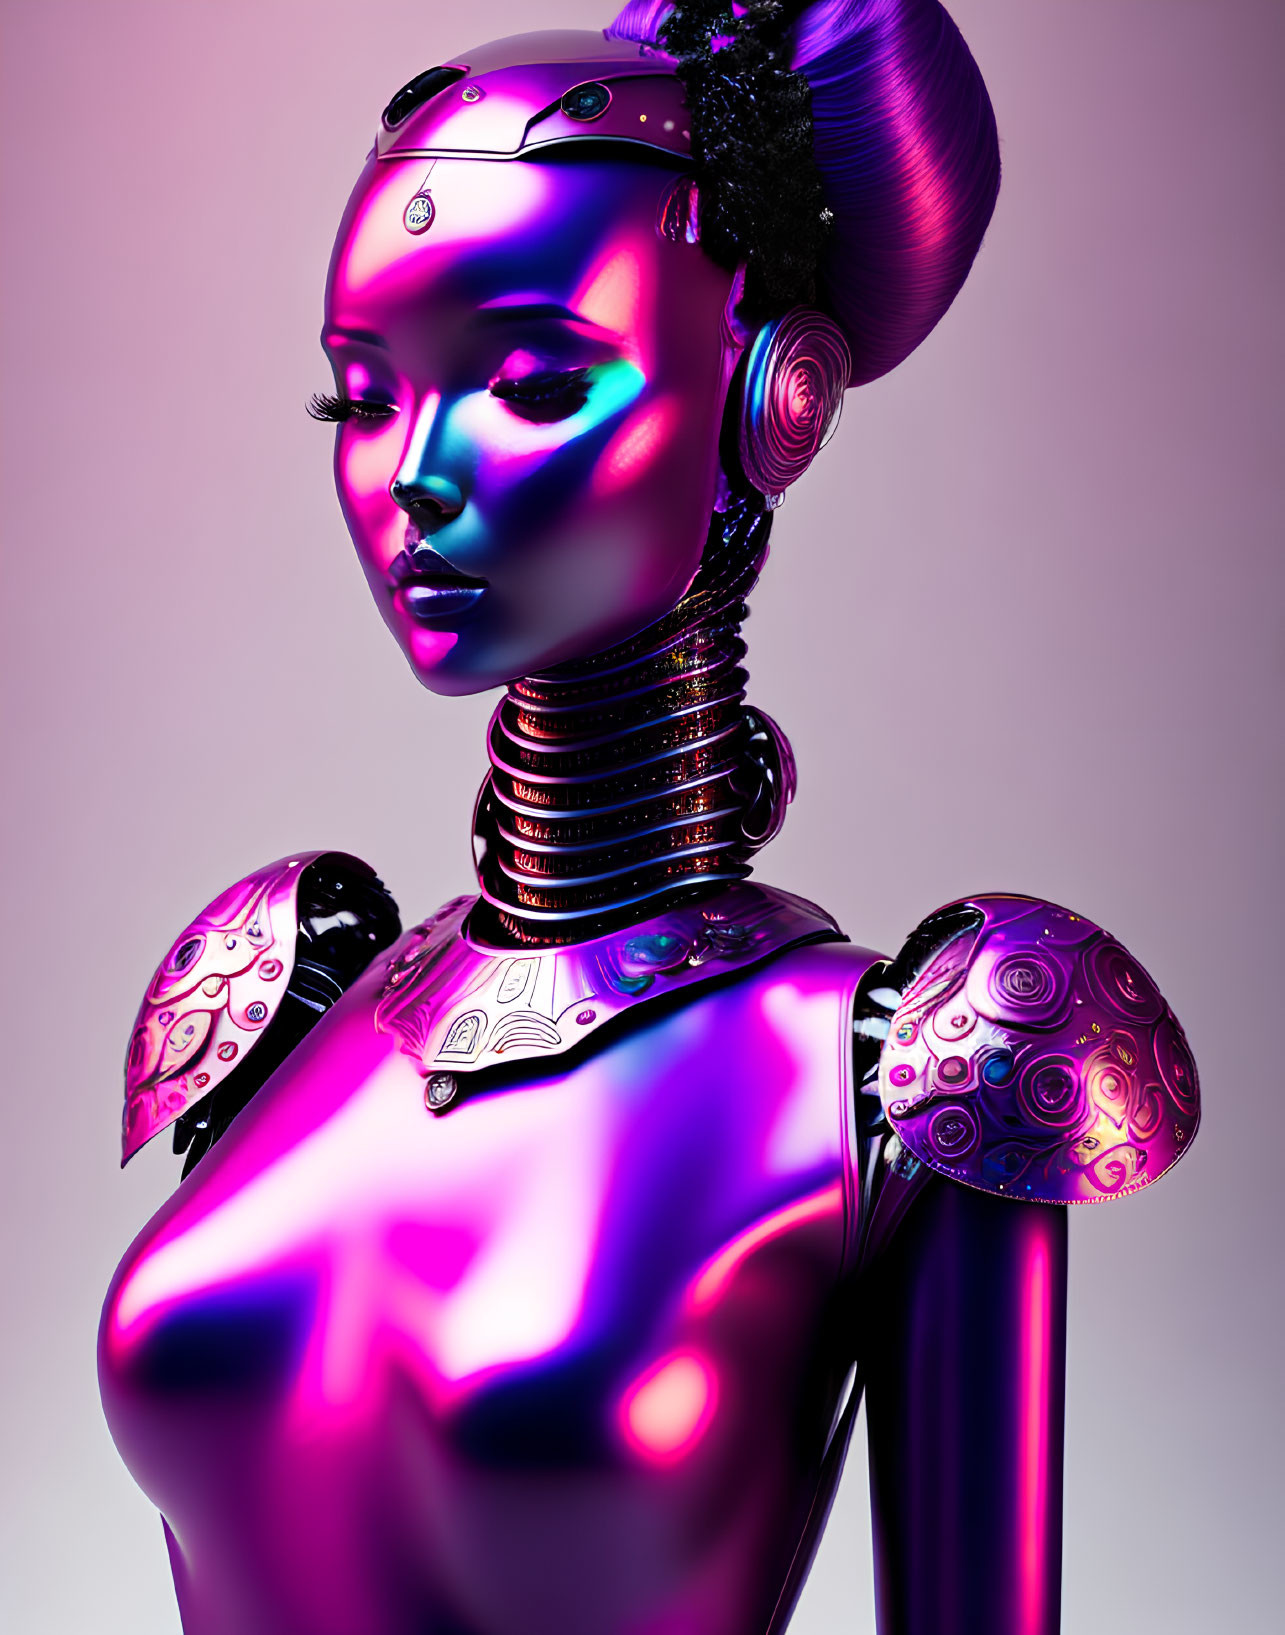 Futuristic female android with glossy purple finish and intricate headpiece on pink gradient background